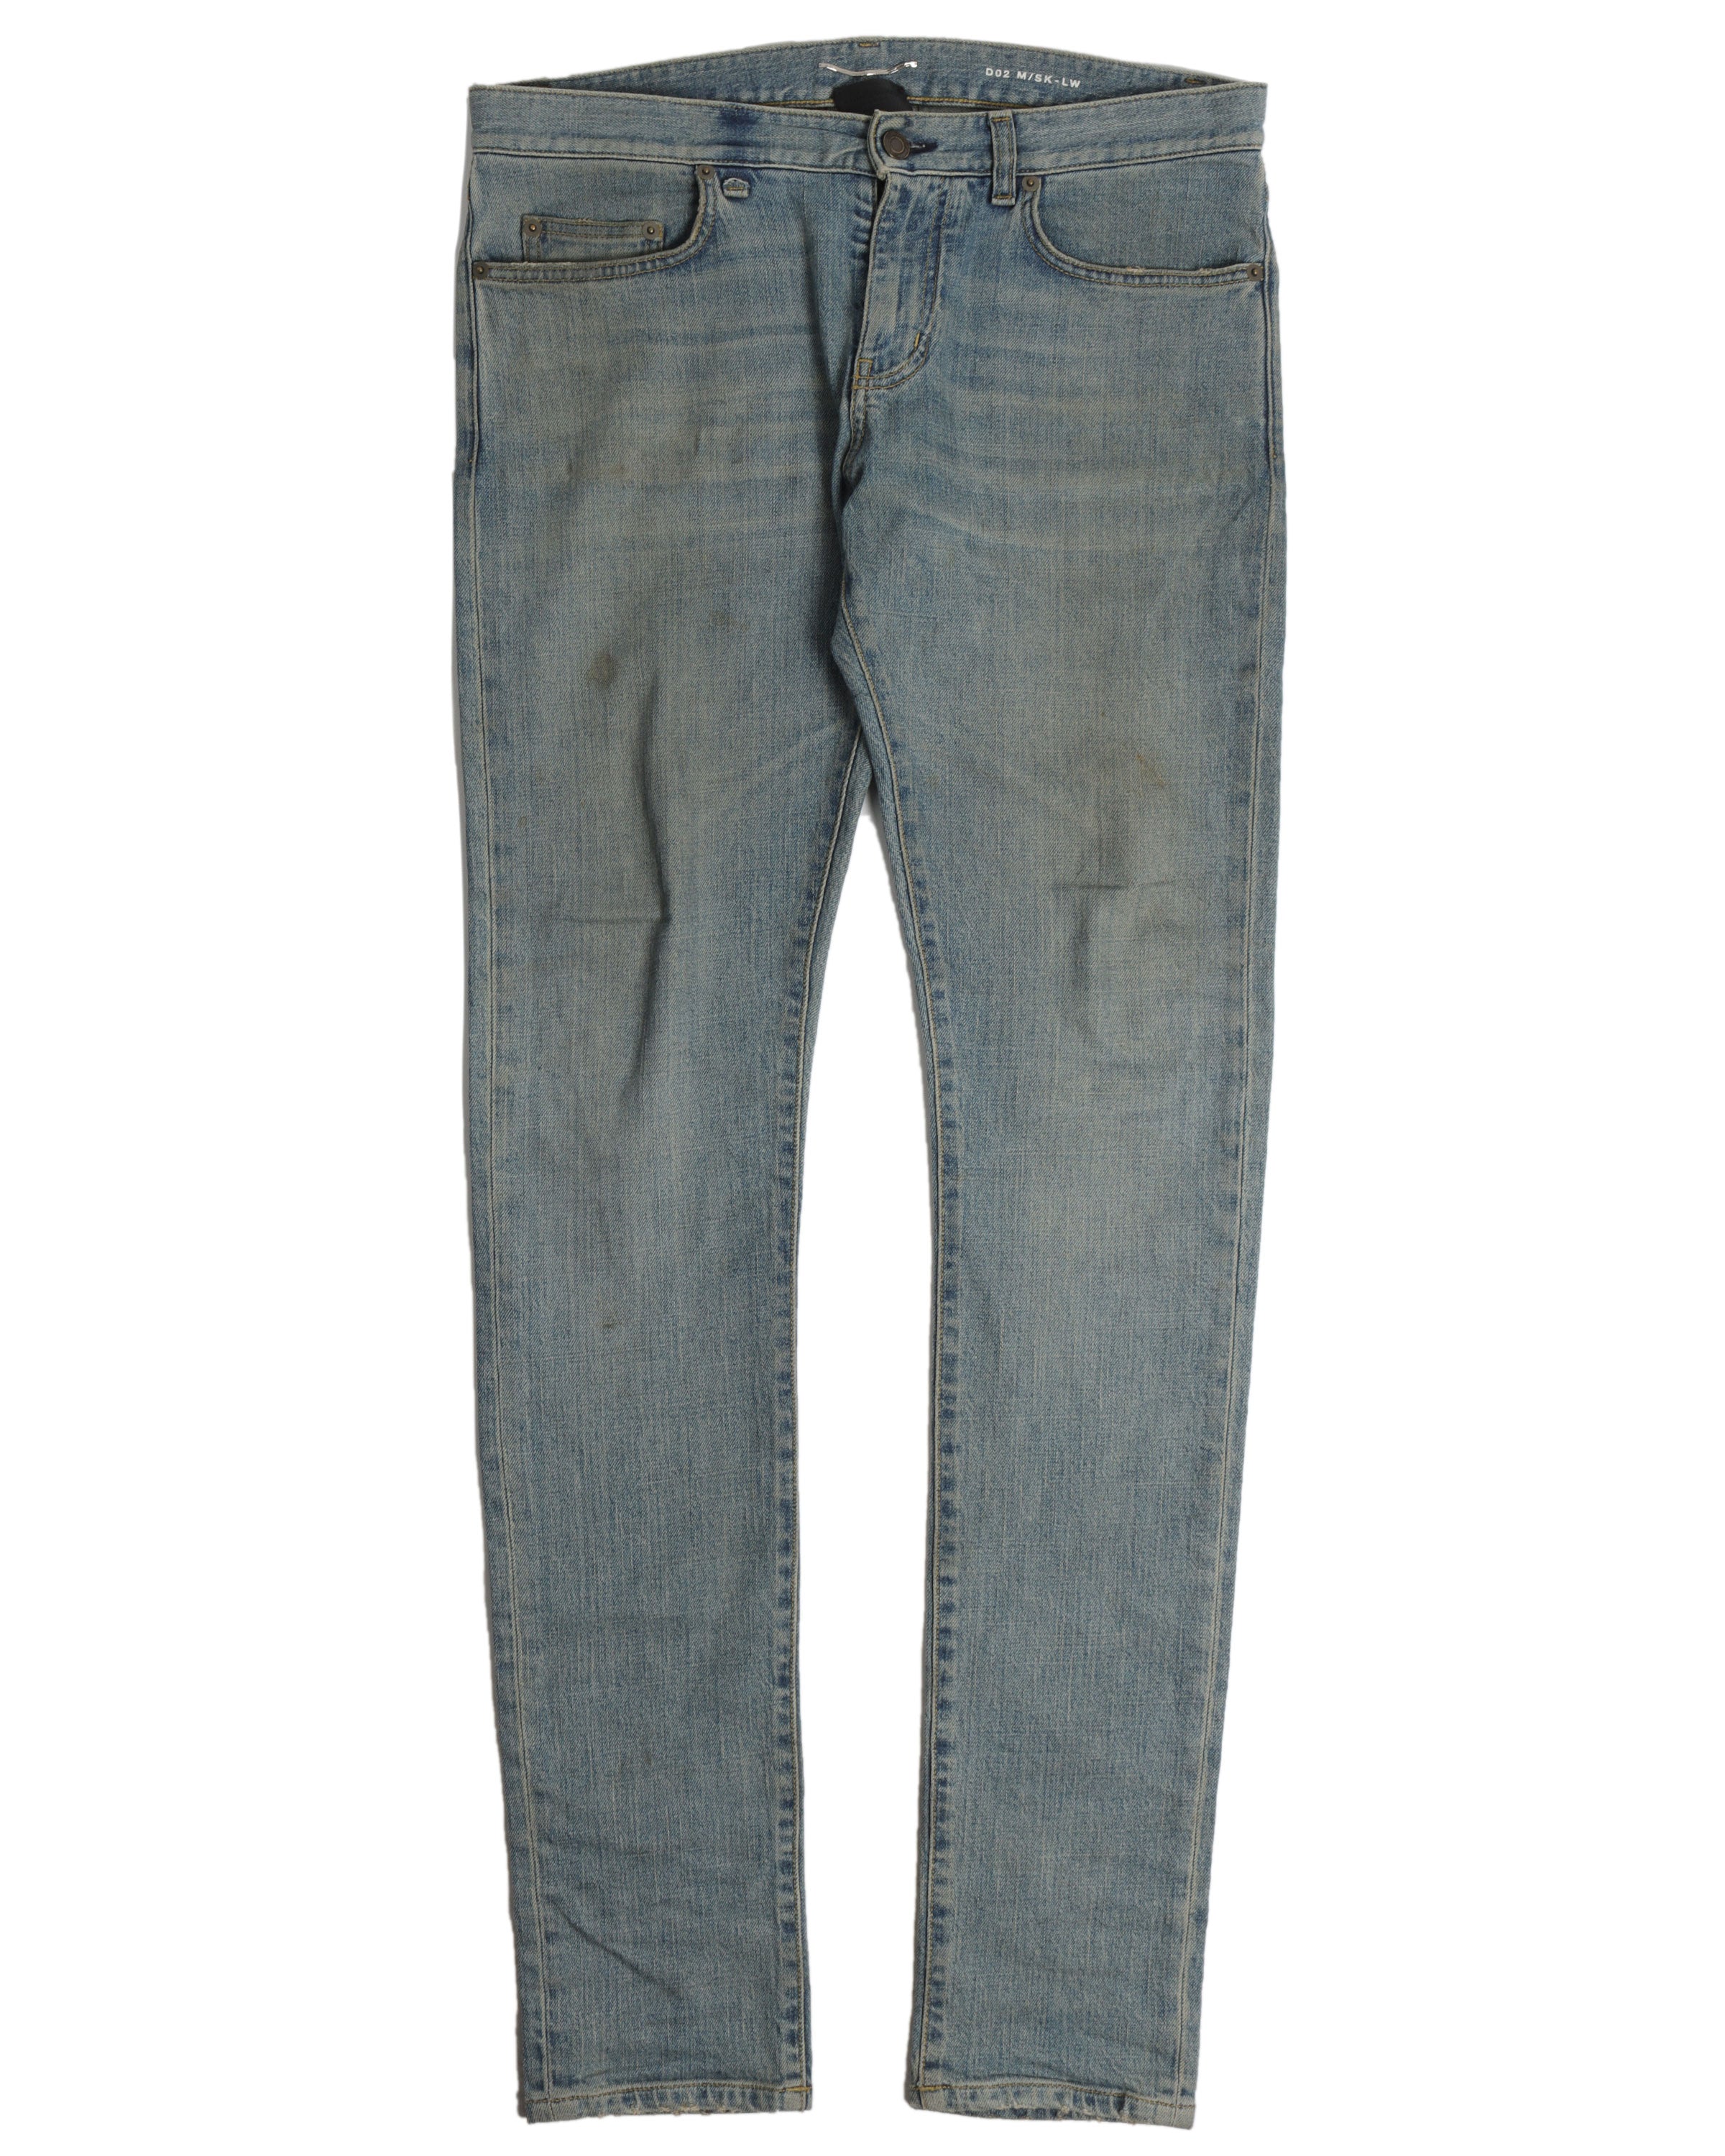 D02 Fade Wash Jeans